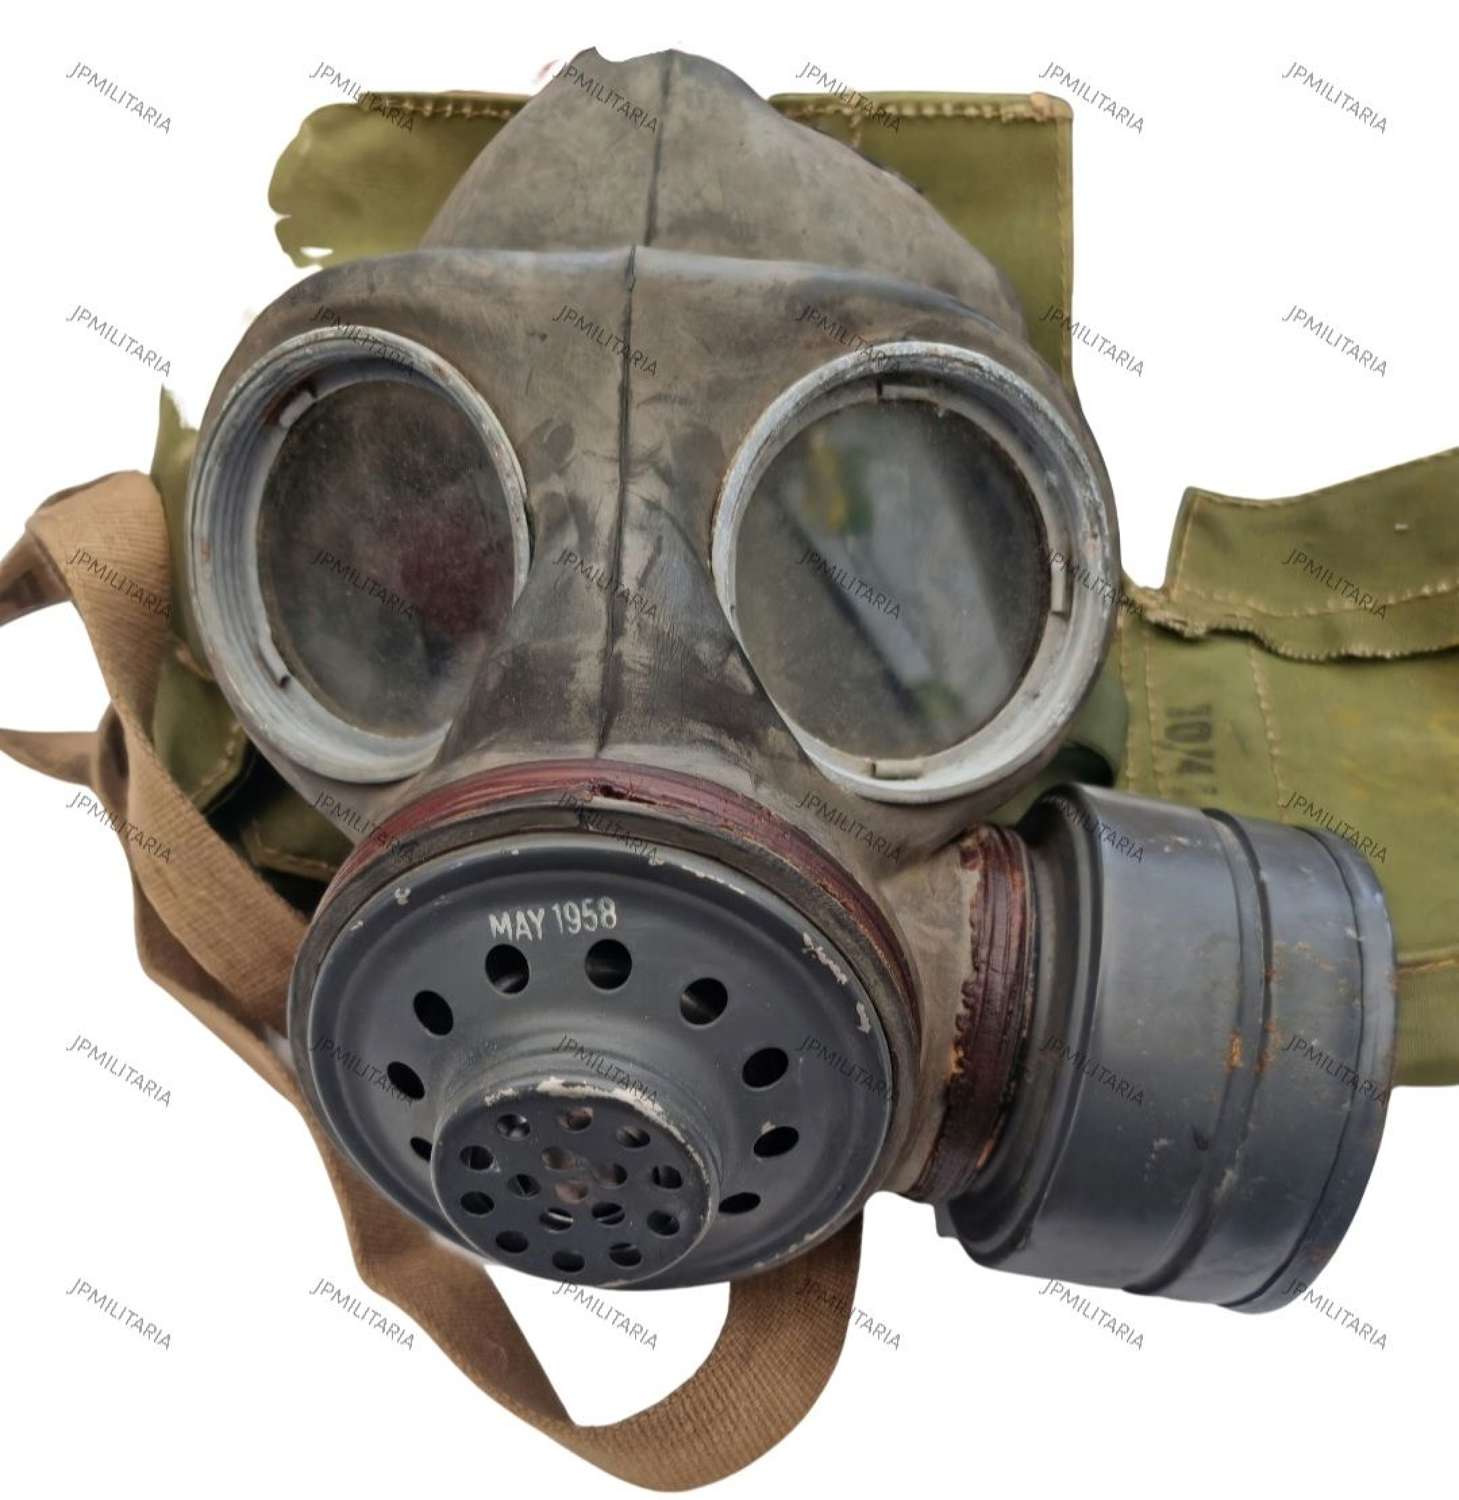 British Light weight gas mask and bag